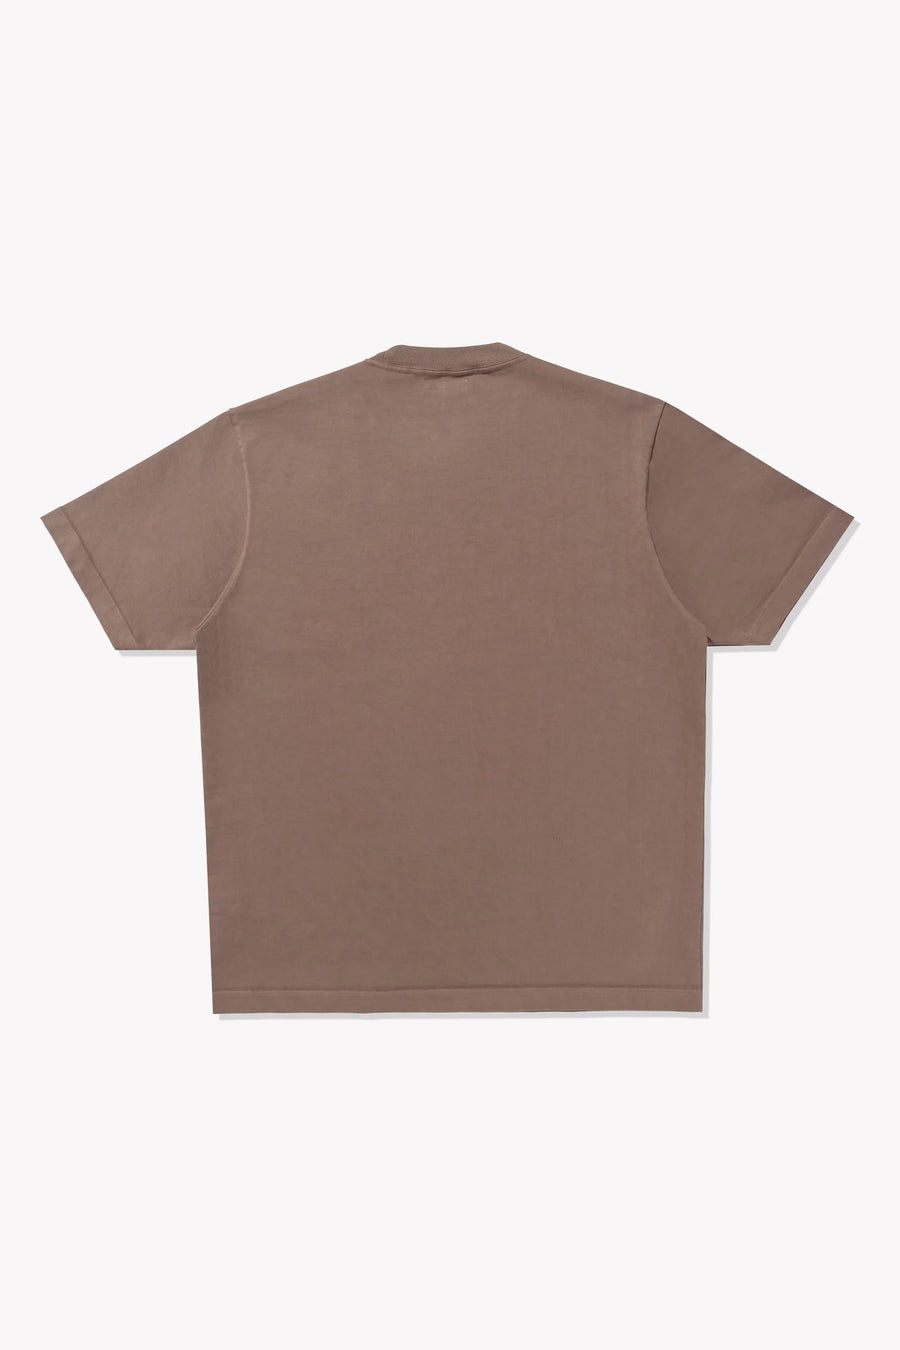 Rugby T-Shirt Taupe